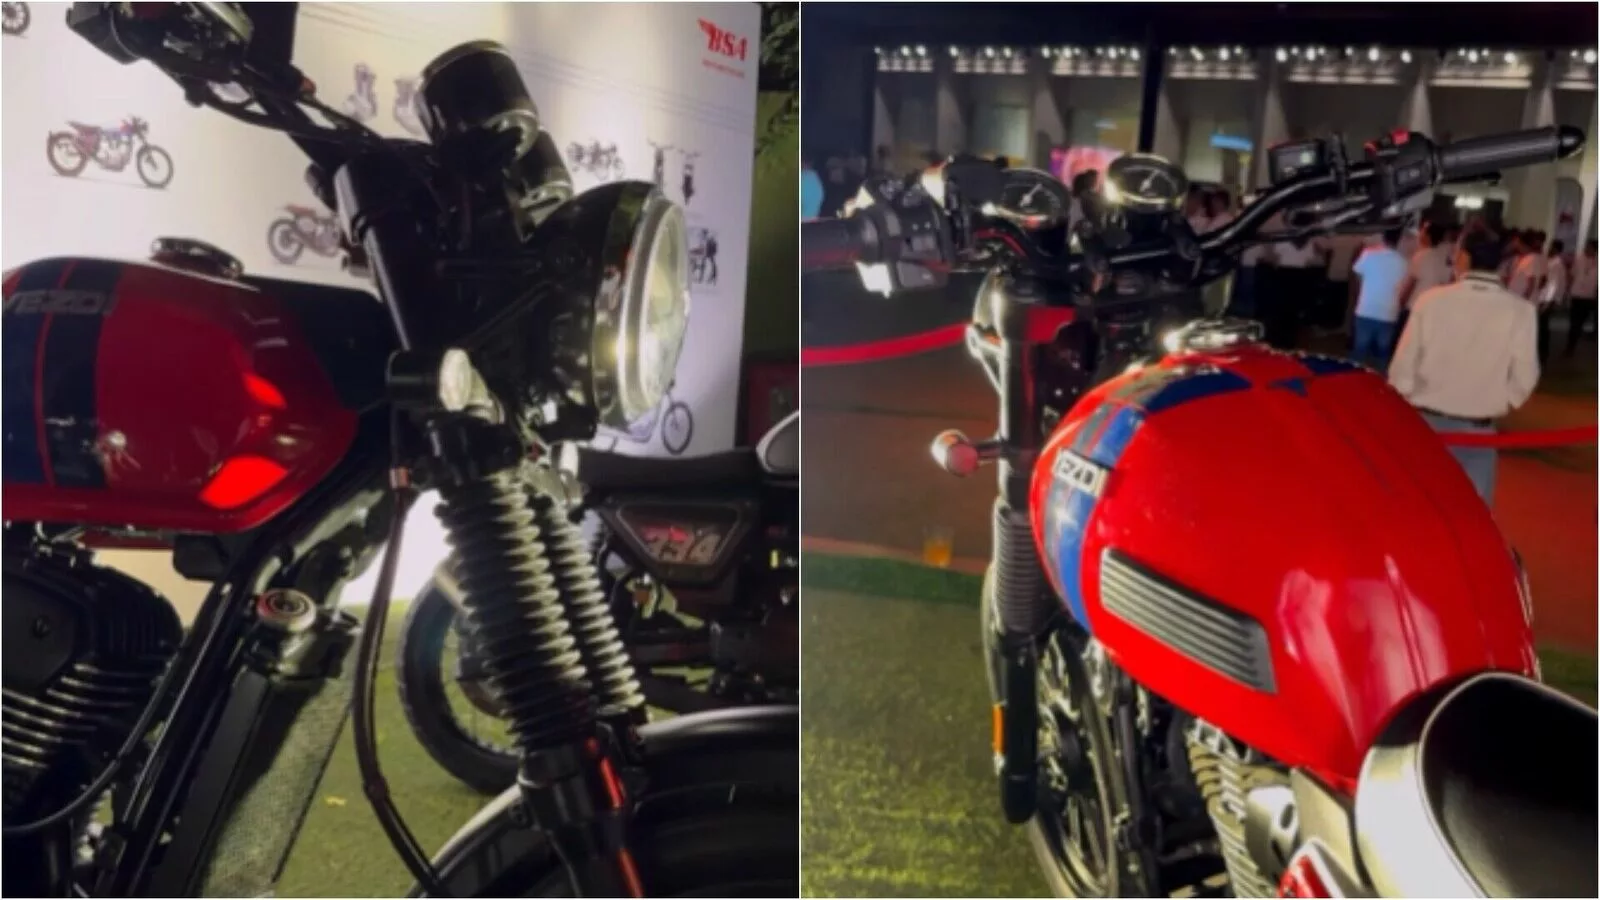 Updated Yezdi Scrambler on the cards? New video hints at an imminent launch